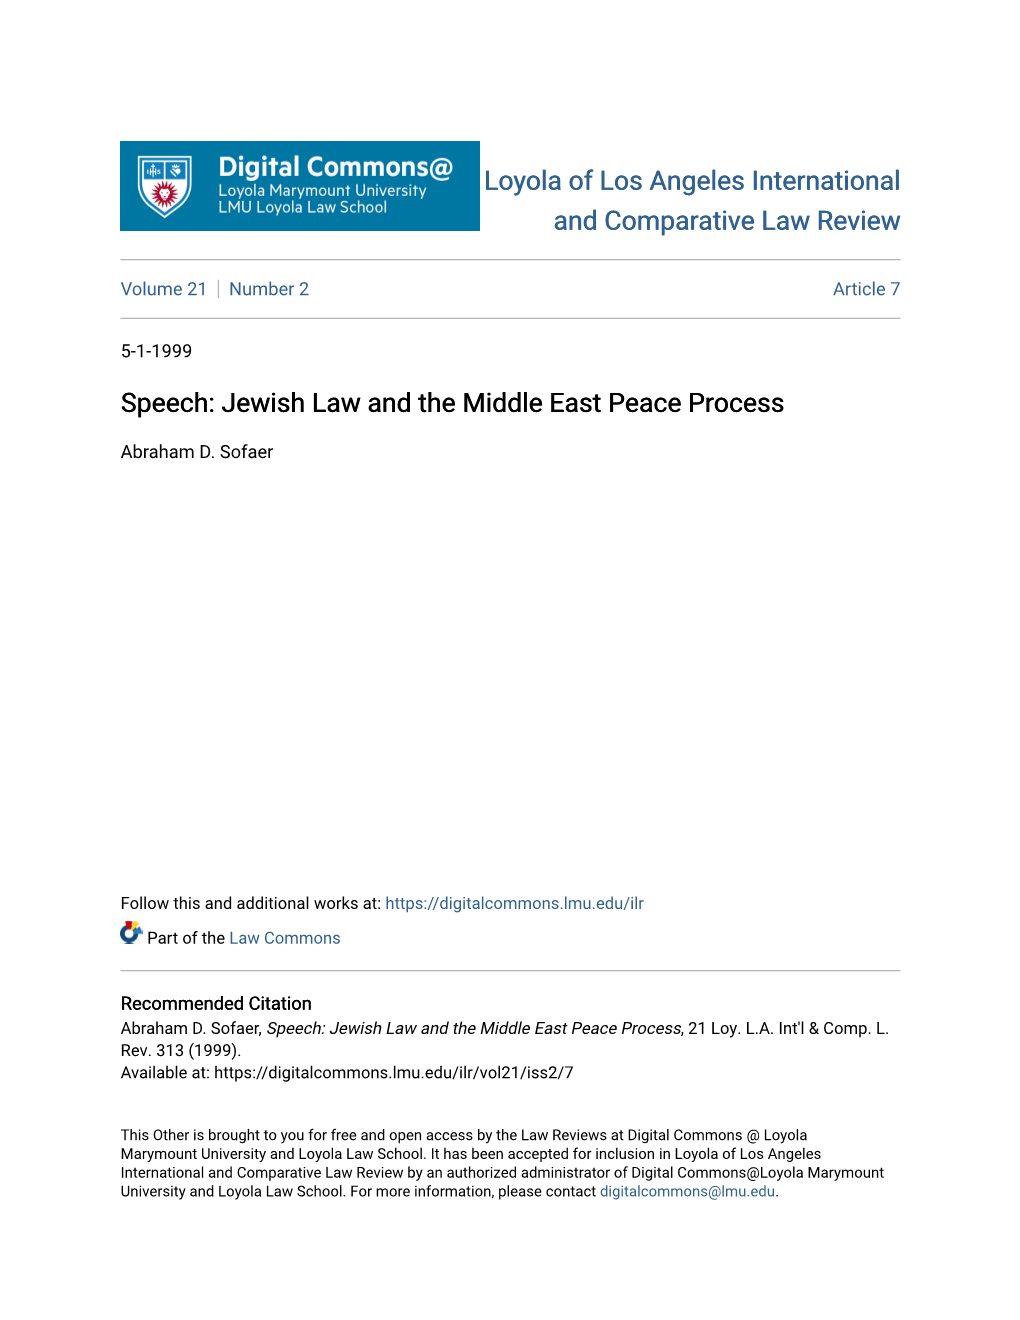 Jewish Law and the Middle East Peace Process